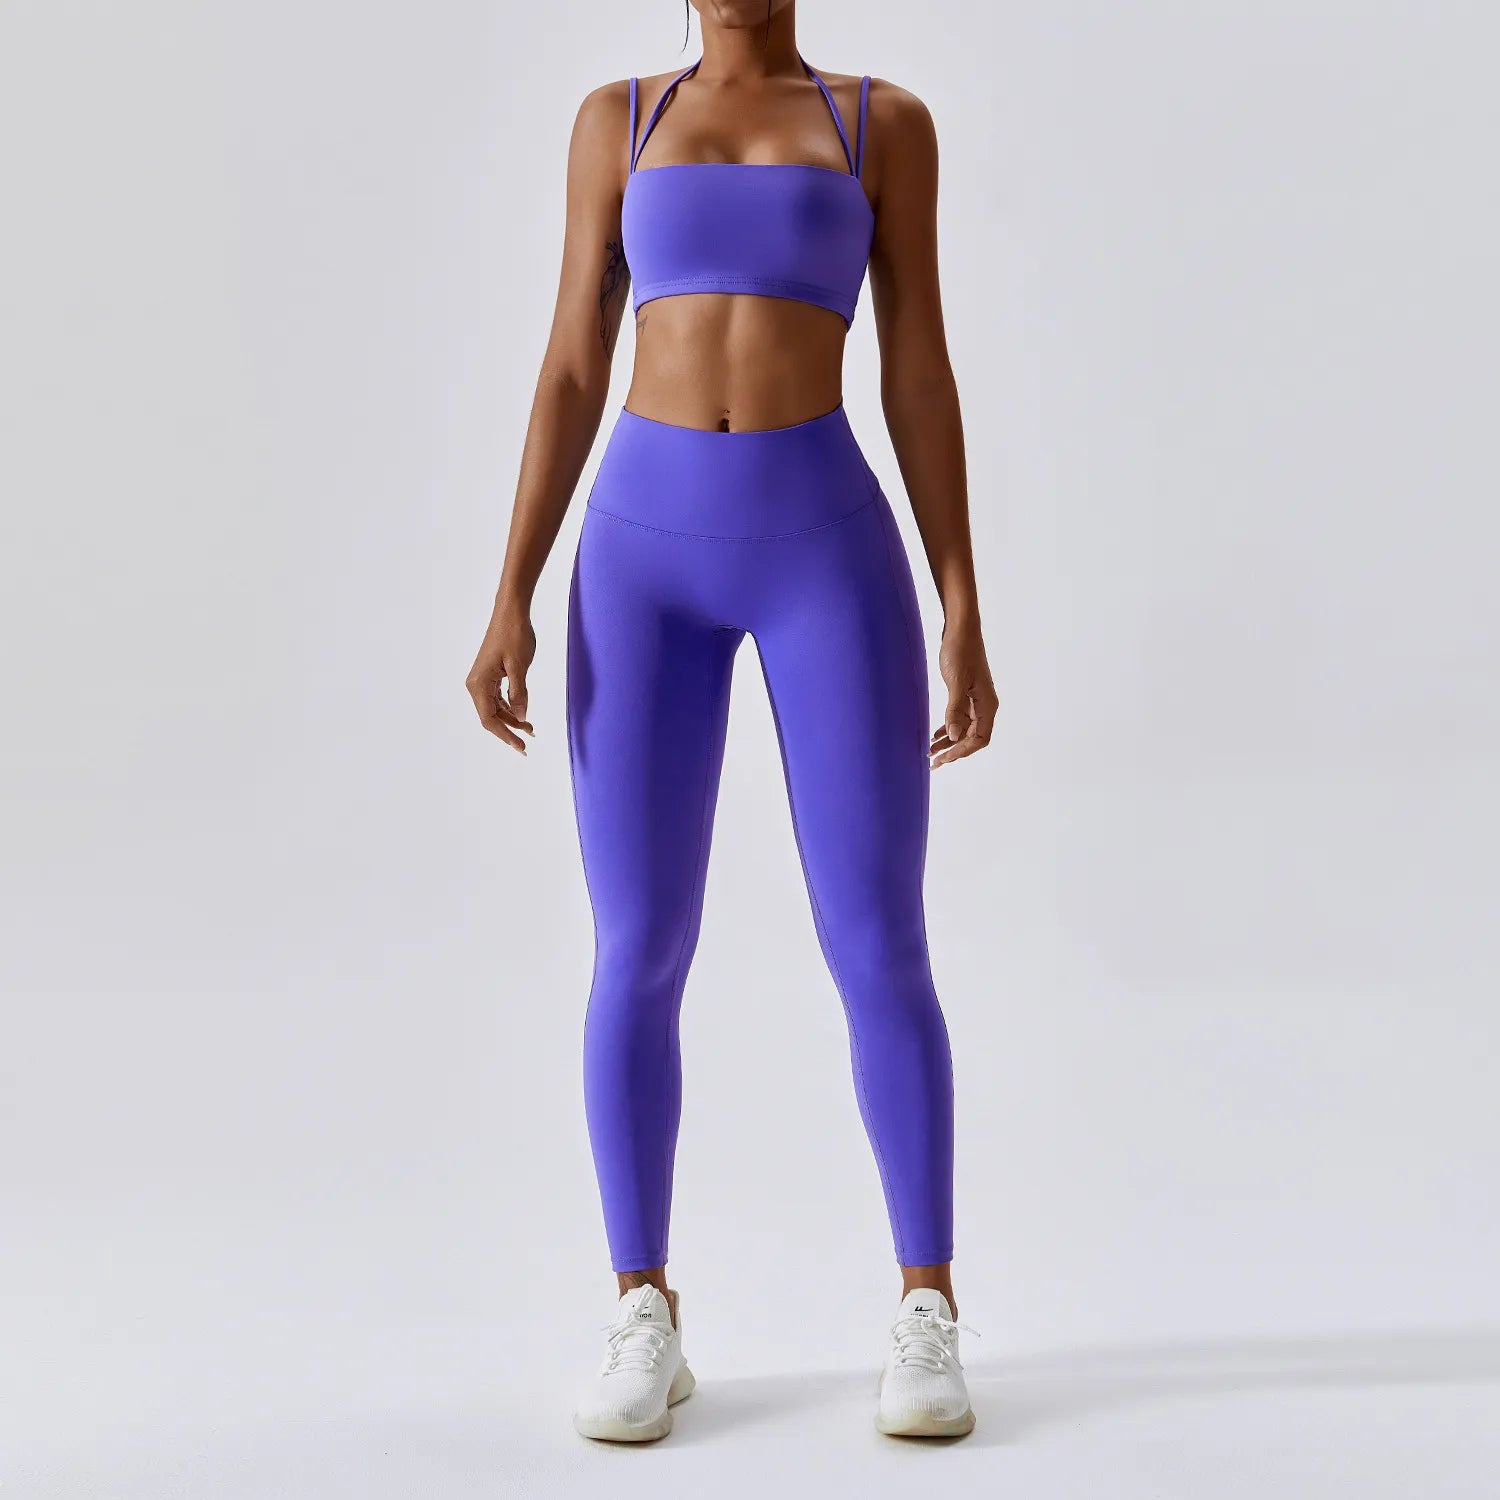 Yoga Clothing Sets Athletic Wear Women High Waist Leggings And Top Two Piece Set Seamless Gym Tracksuit Fitness Workout Outfits